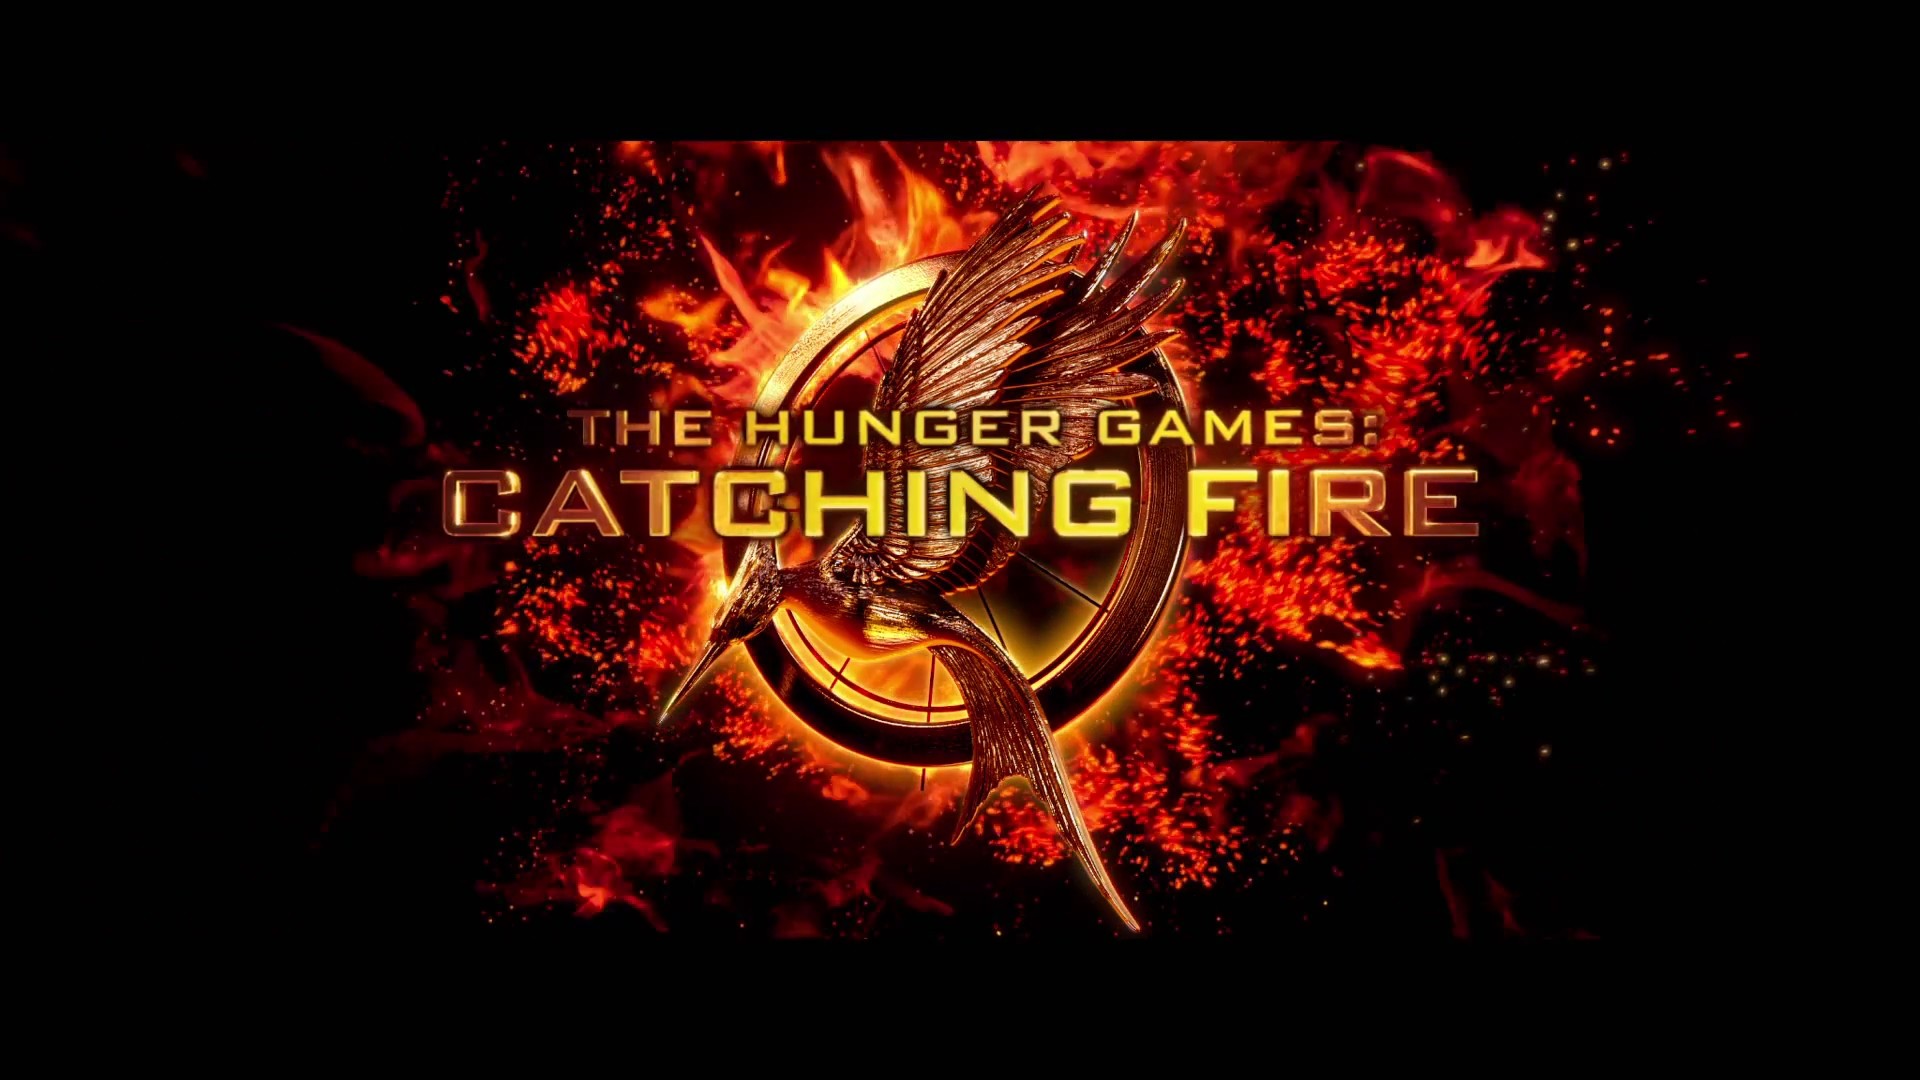 1920x1080 LivingFilms images The Hunger Games: Catching Fire Wallpaper HD wallpaper  and background photos